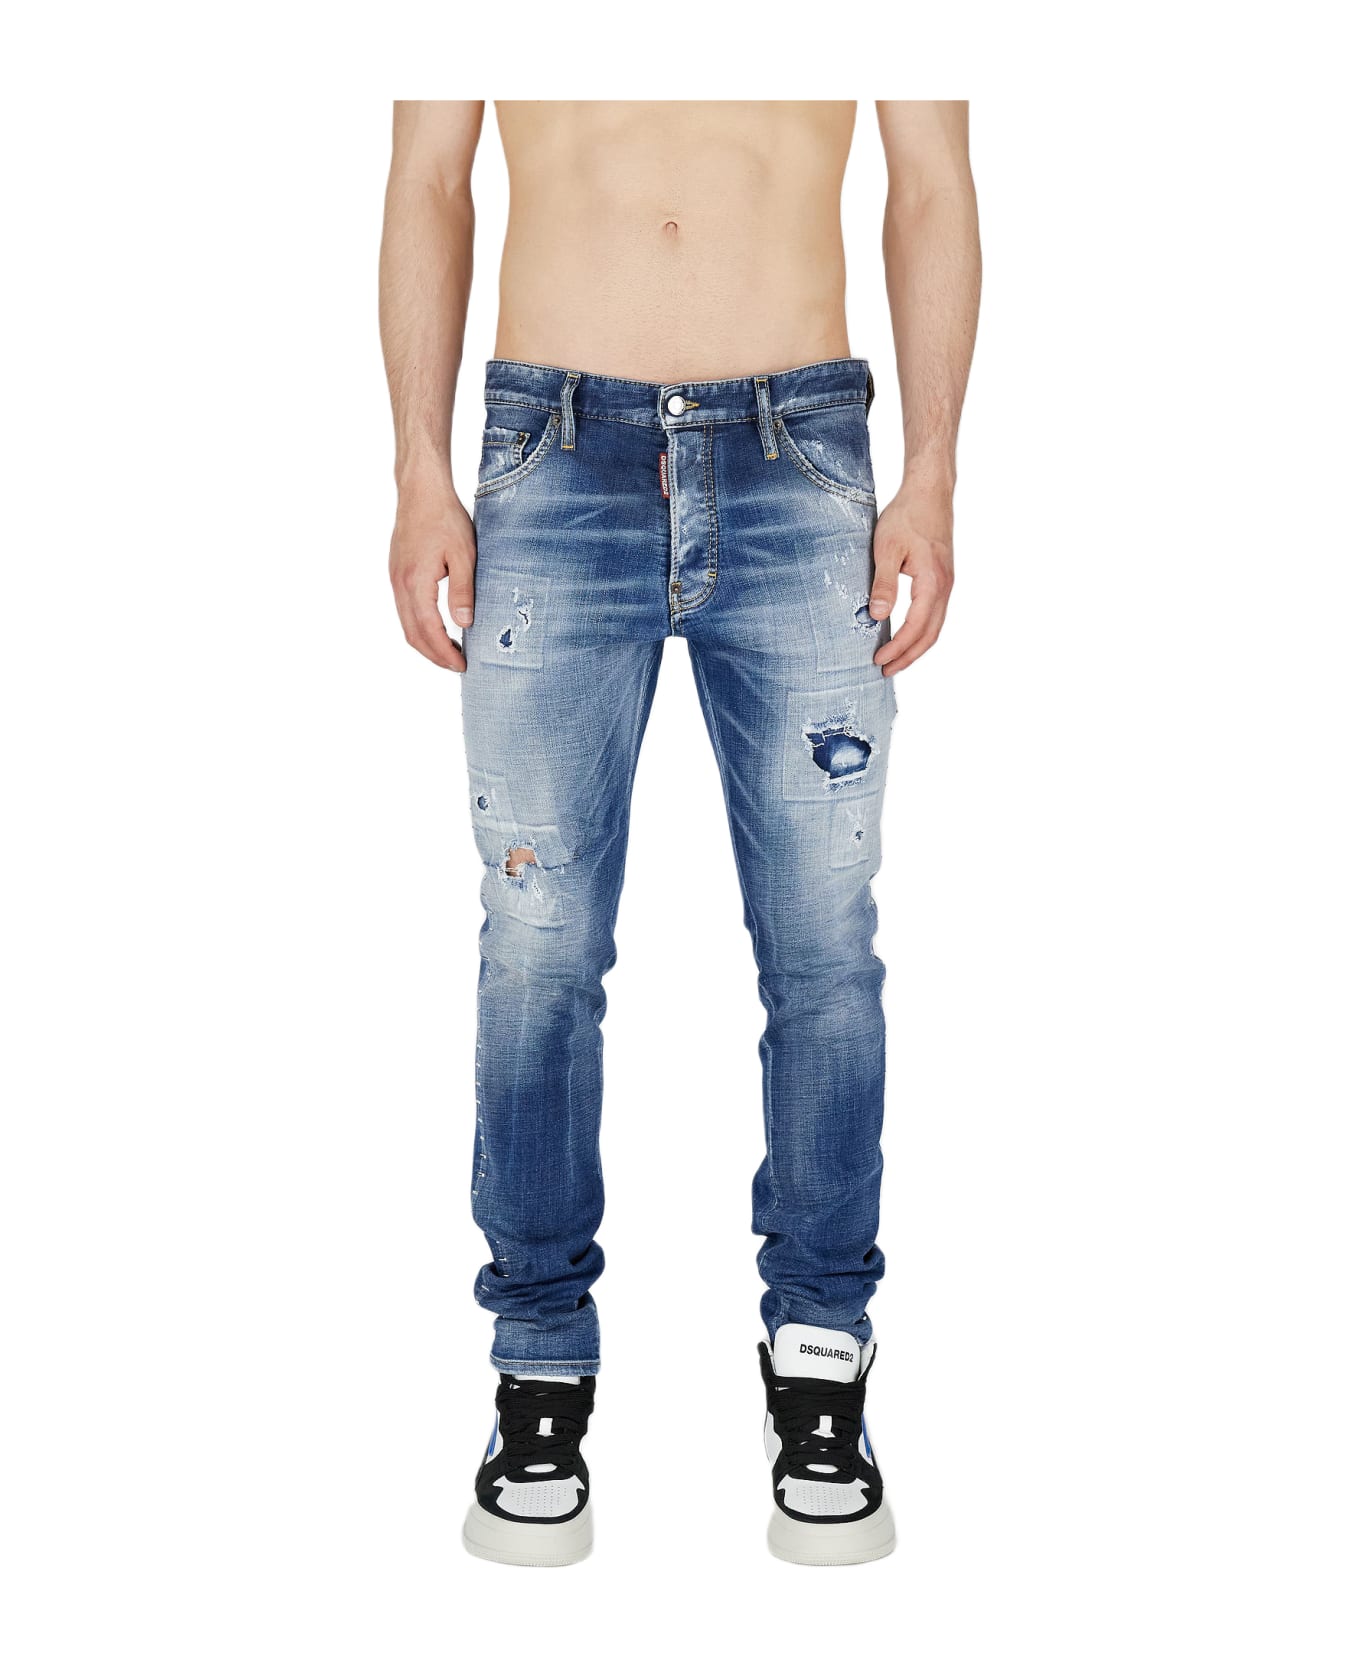 Dsquared2 Jeans - Blue navy